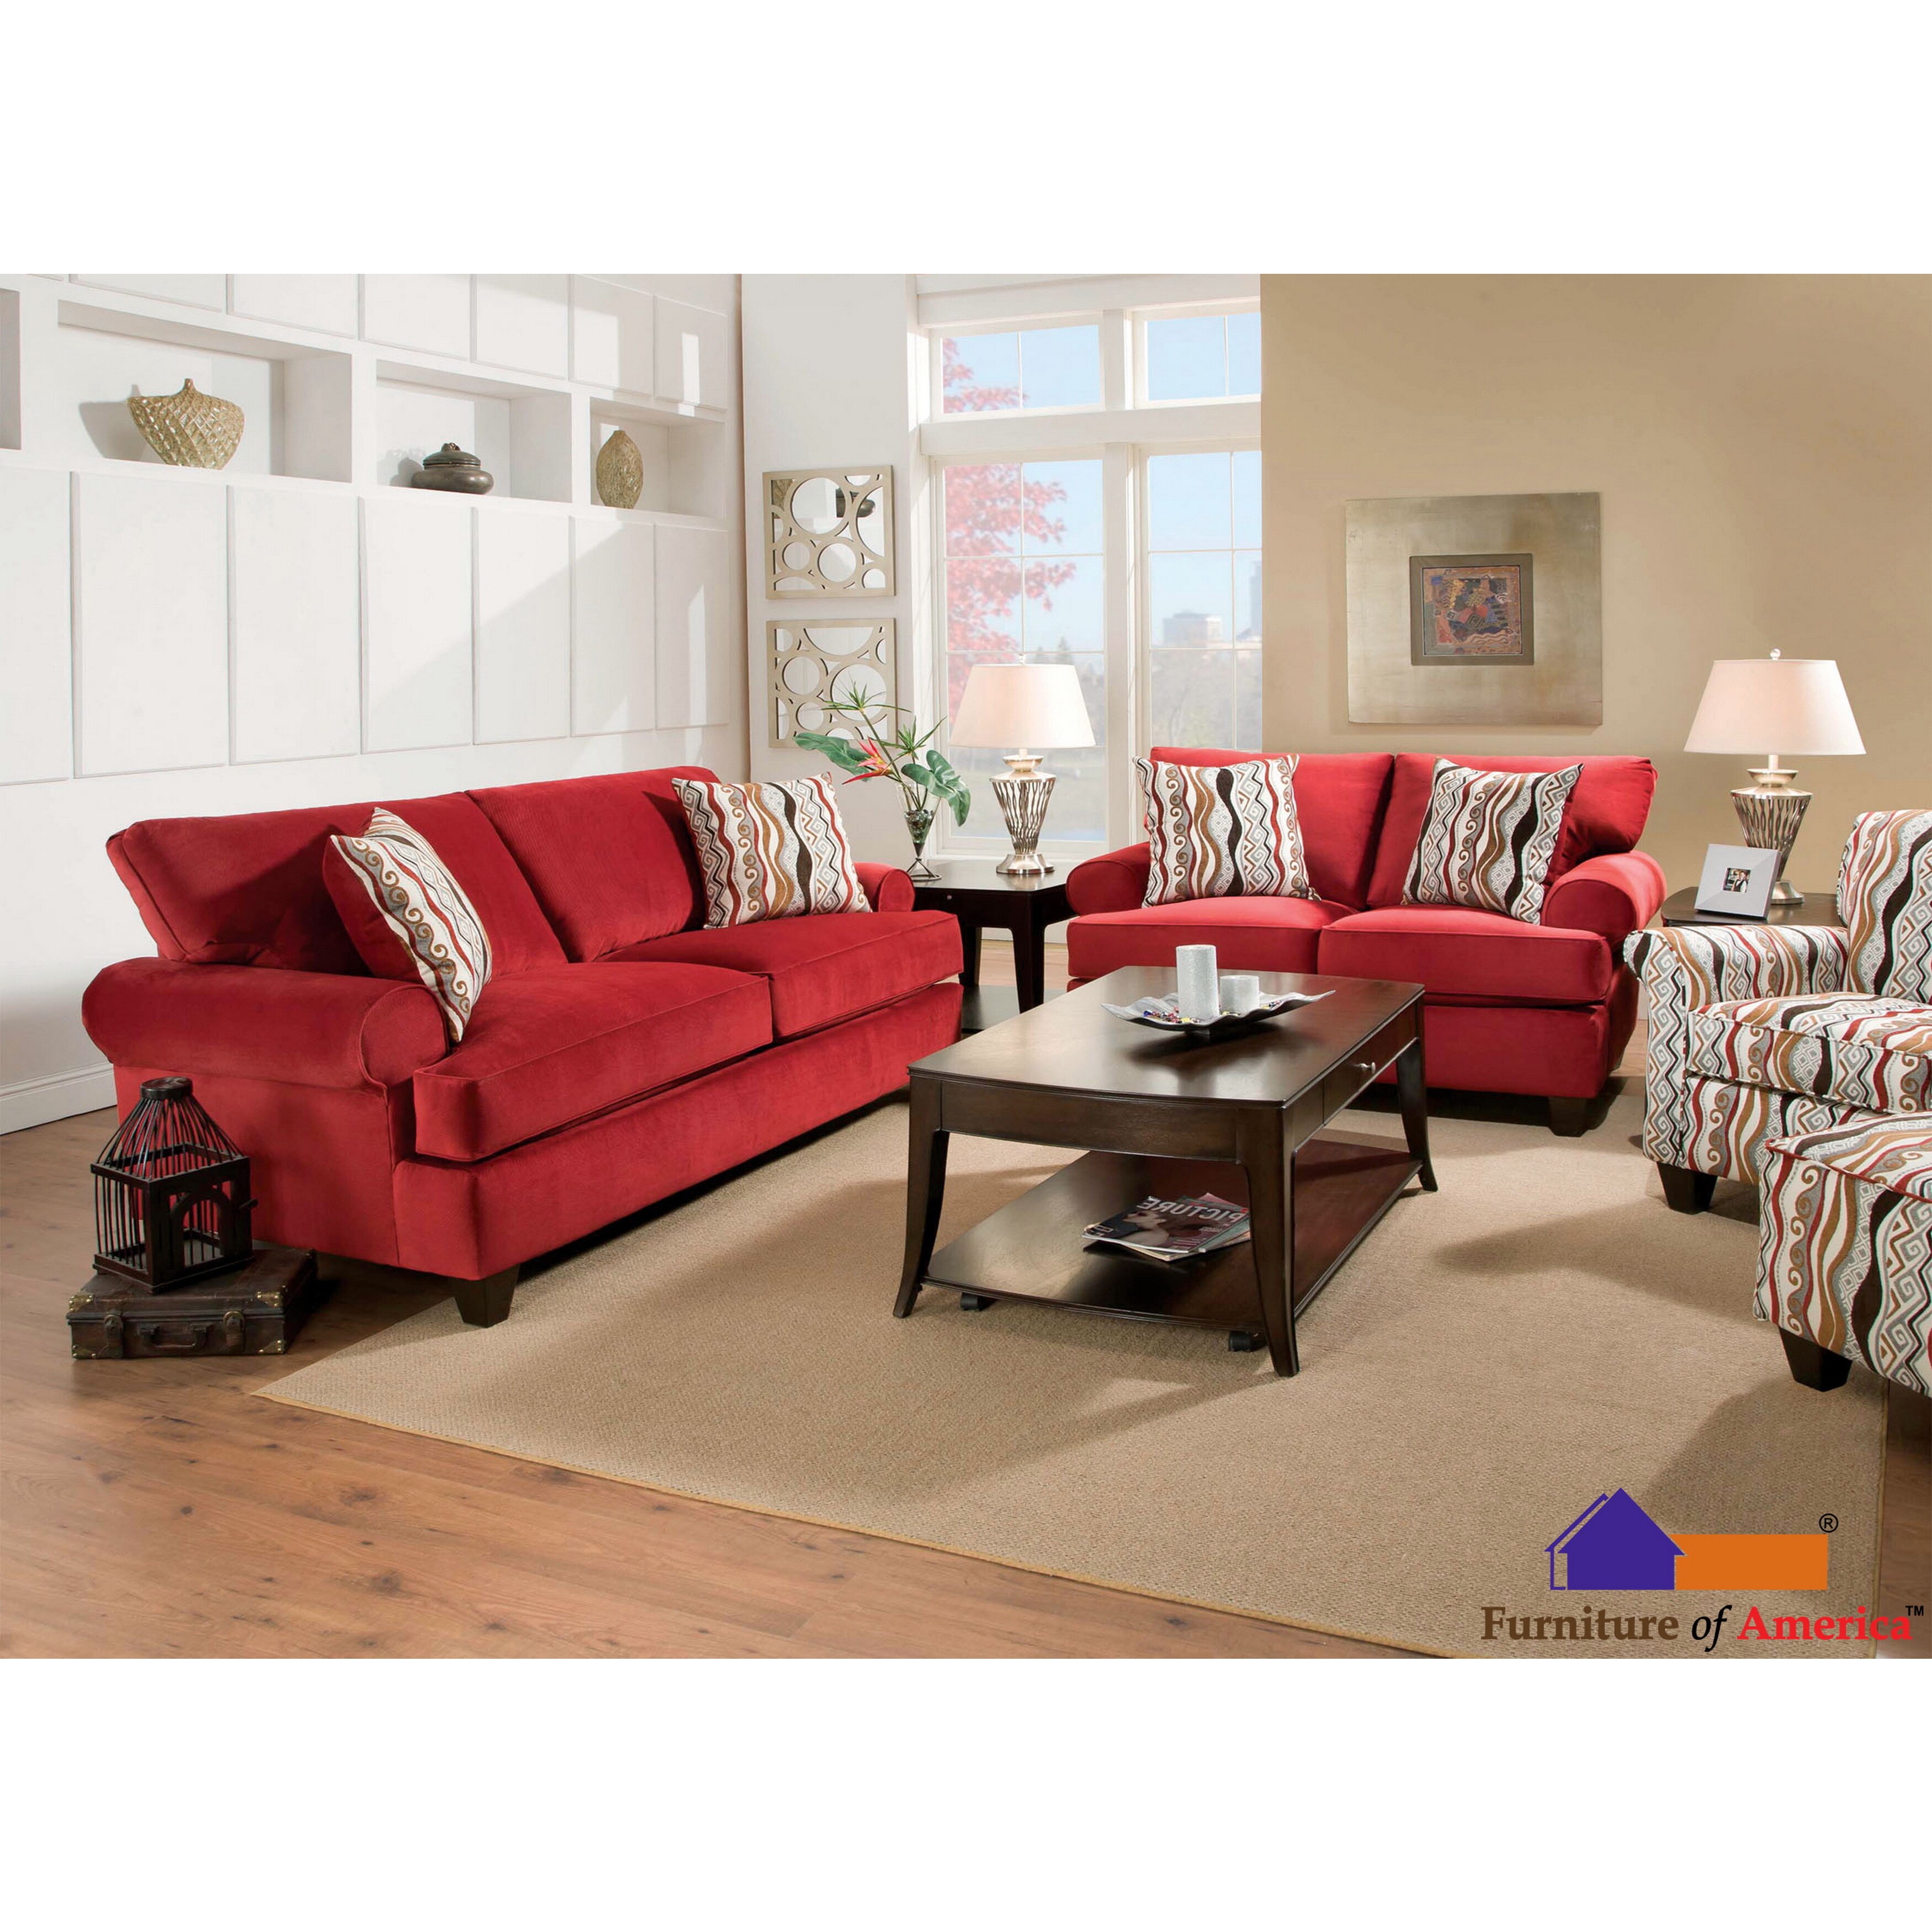 Furniture Of America Invenzy Transitional 2 piece Corduroy Fabric Sofa And Loveseat Set